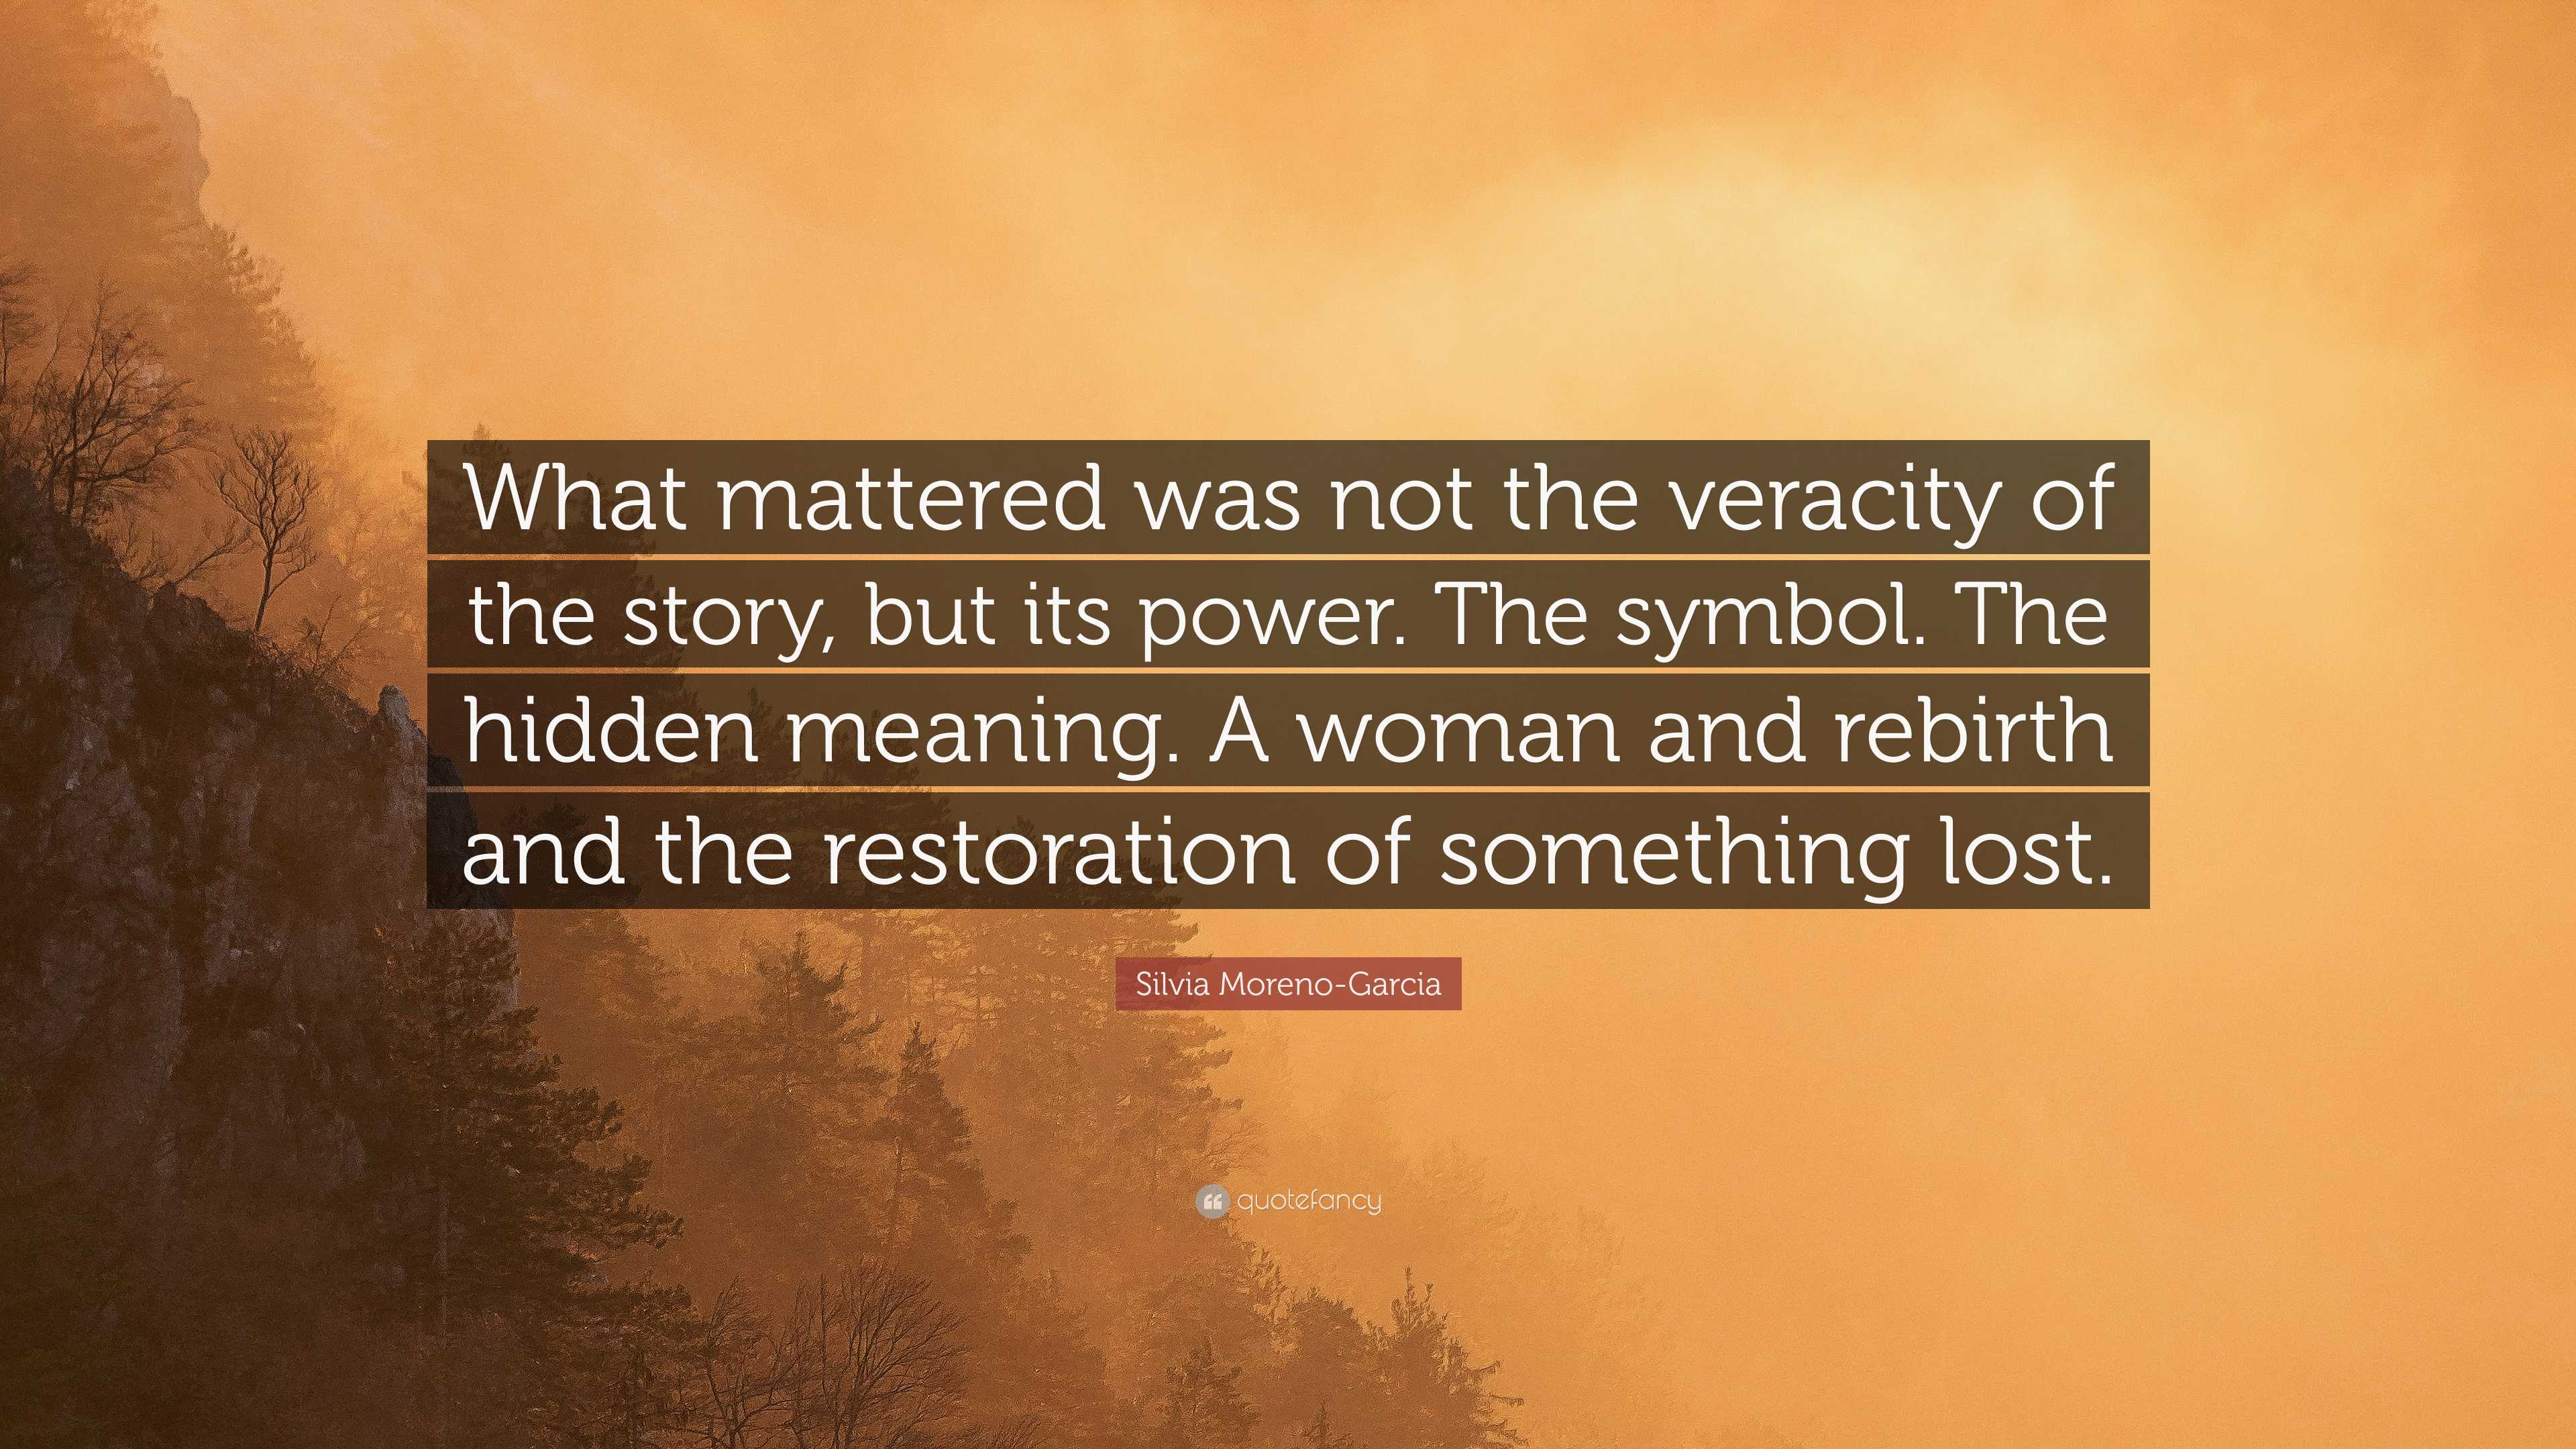 Silvia Moreno-Garcia Quote: “What mattered was not the veracity of the ...